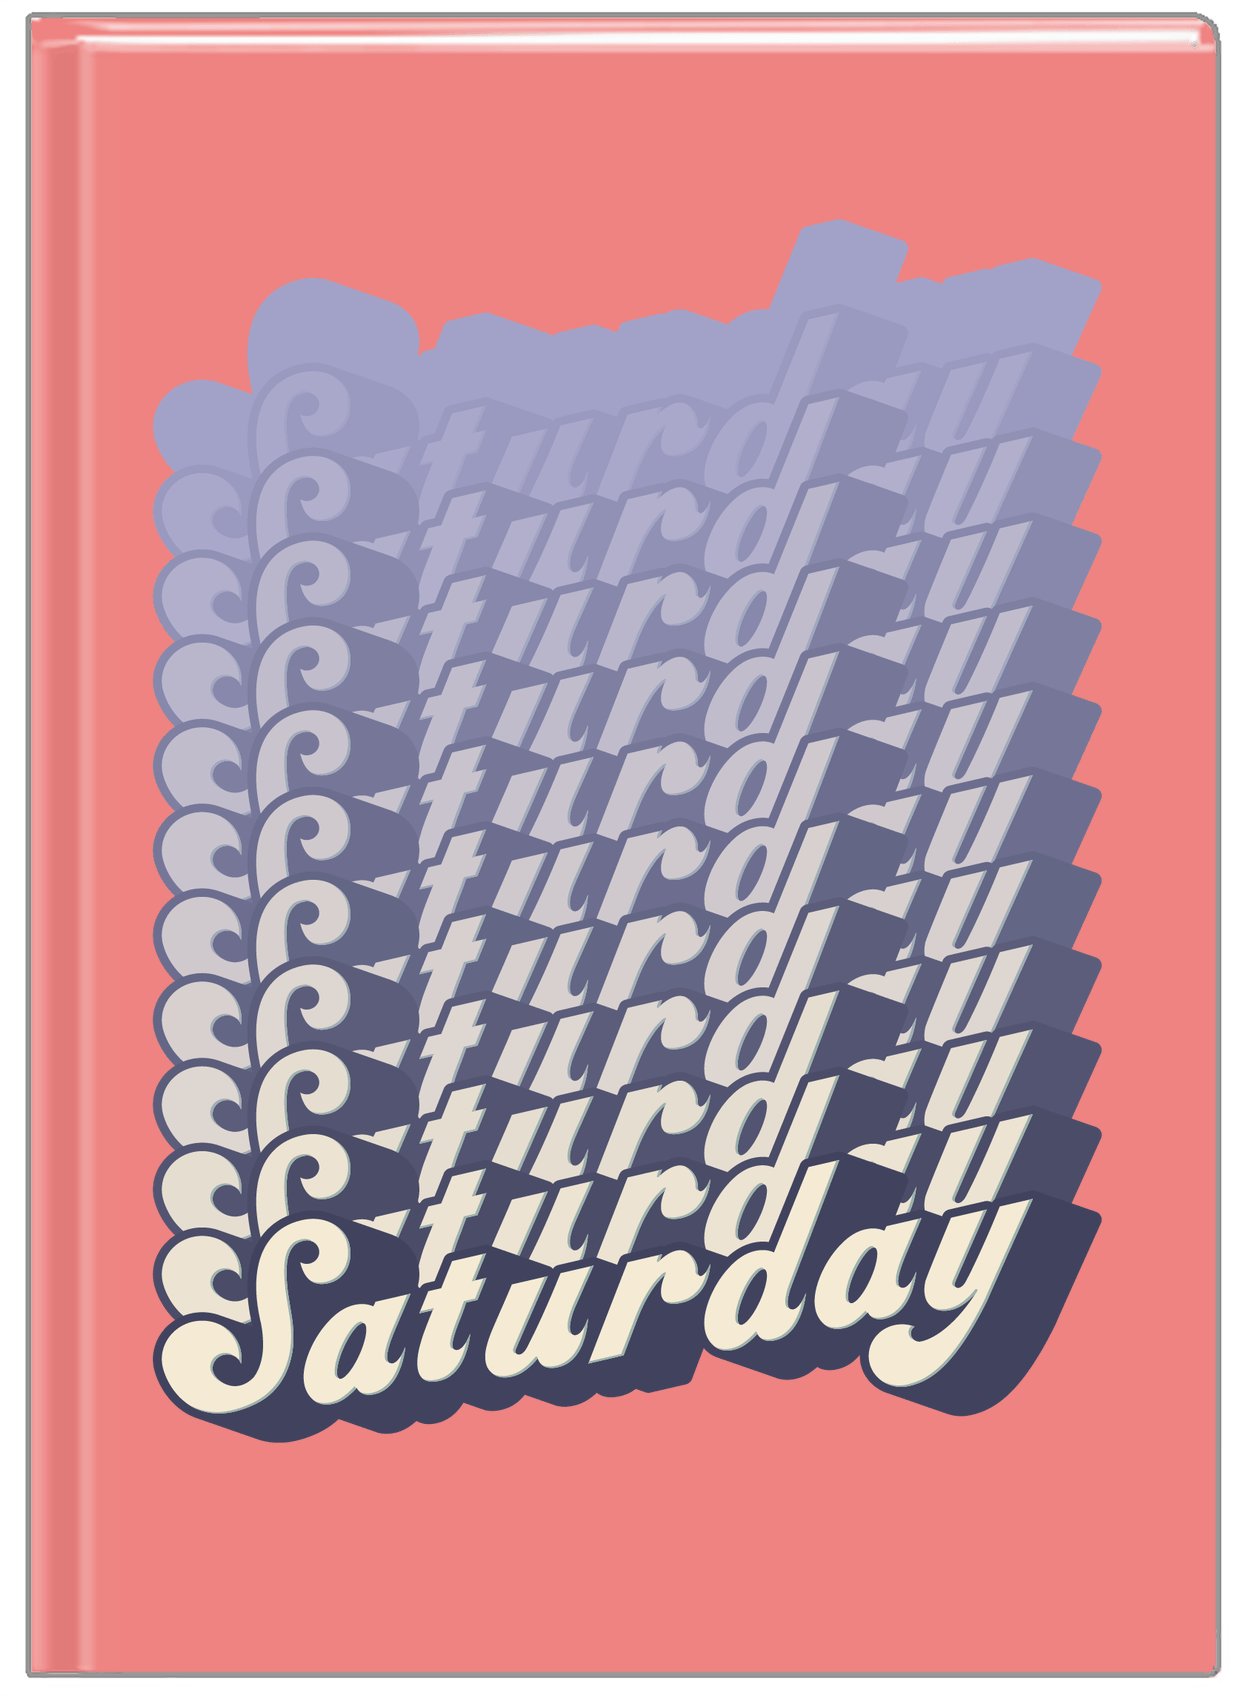 Retro Sunday Journal - Front View